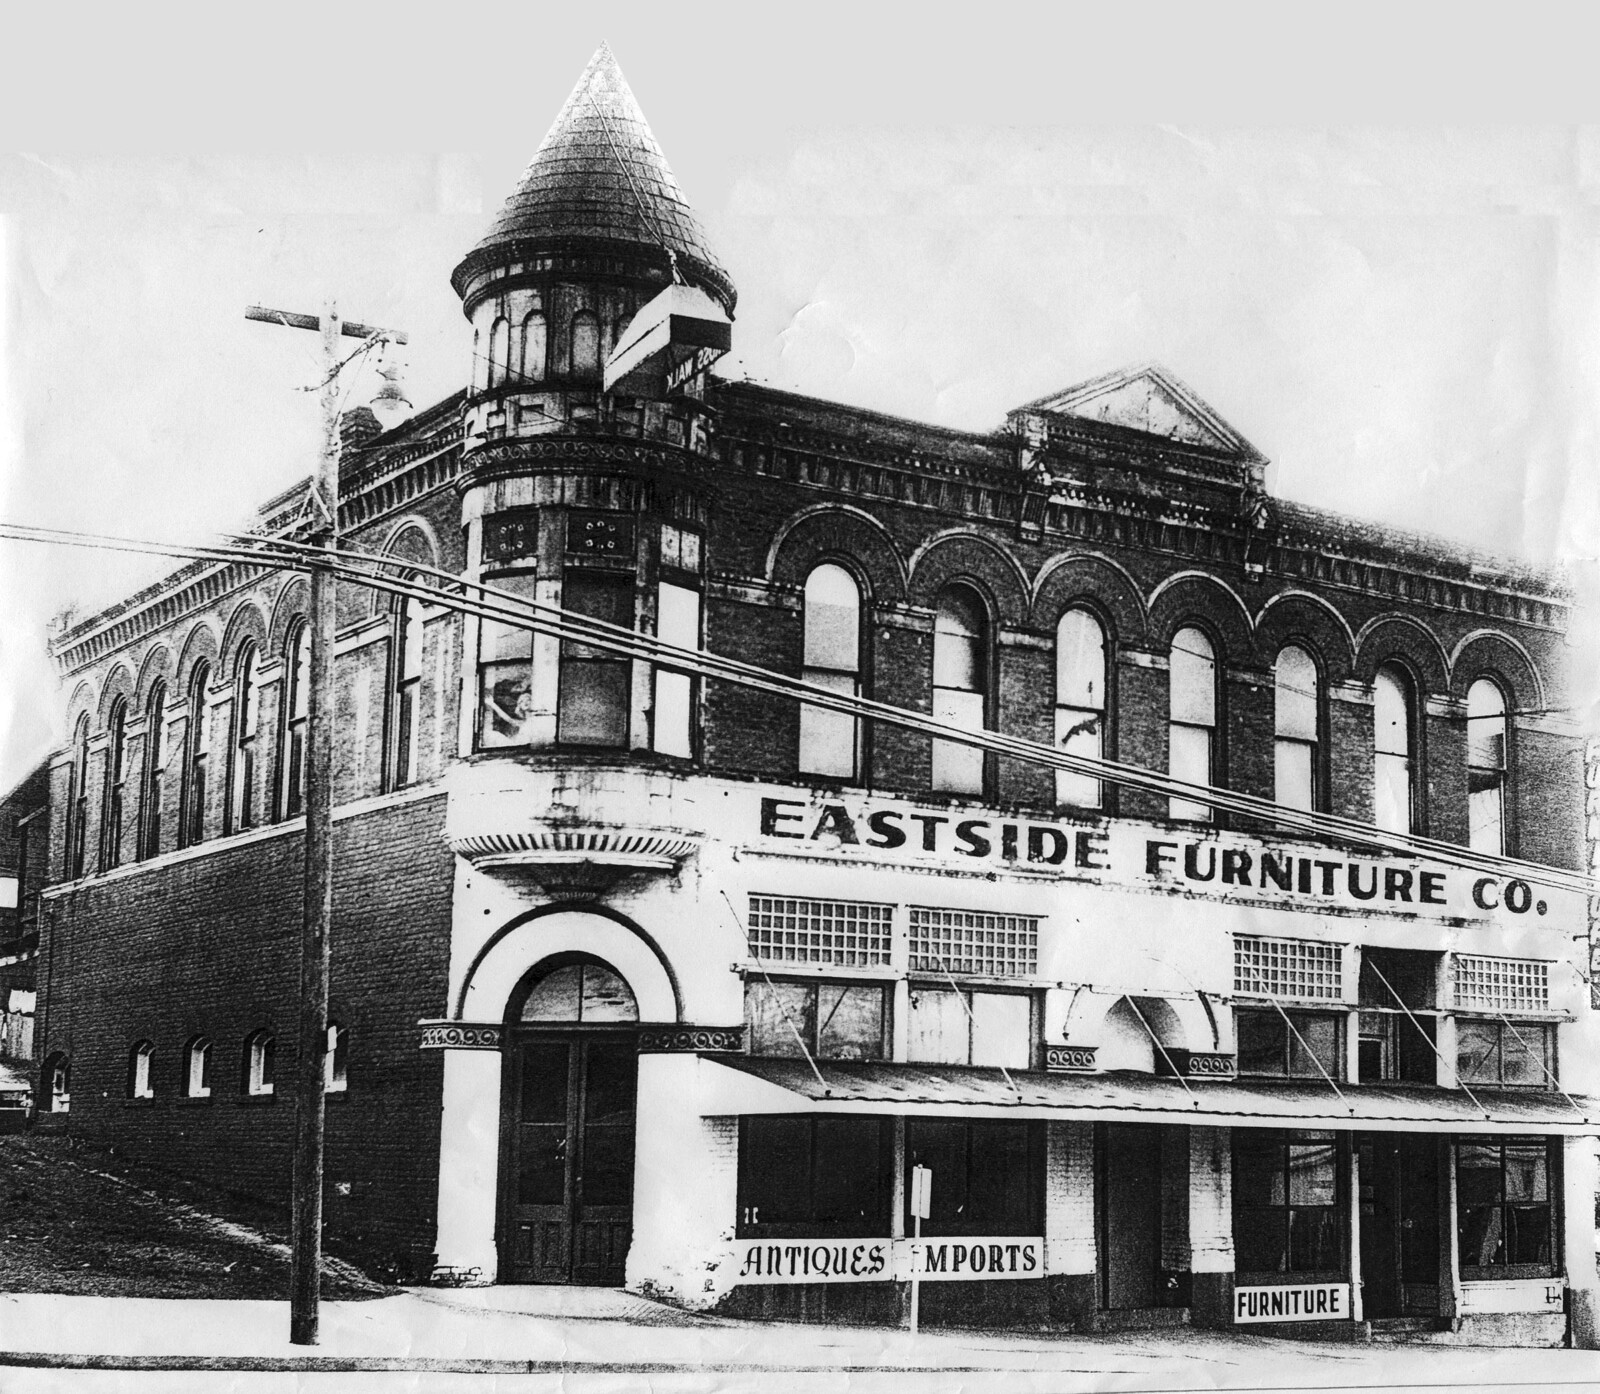 Historic Peter Kirk Building with Eastside Furniture Company sign